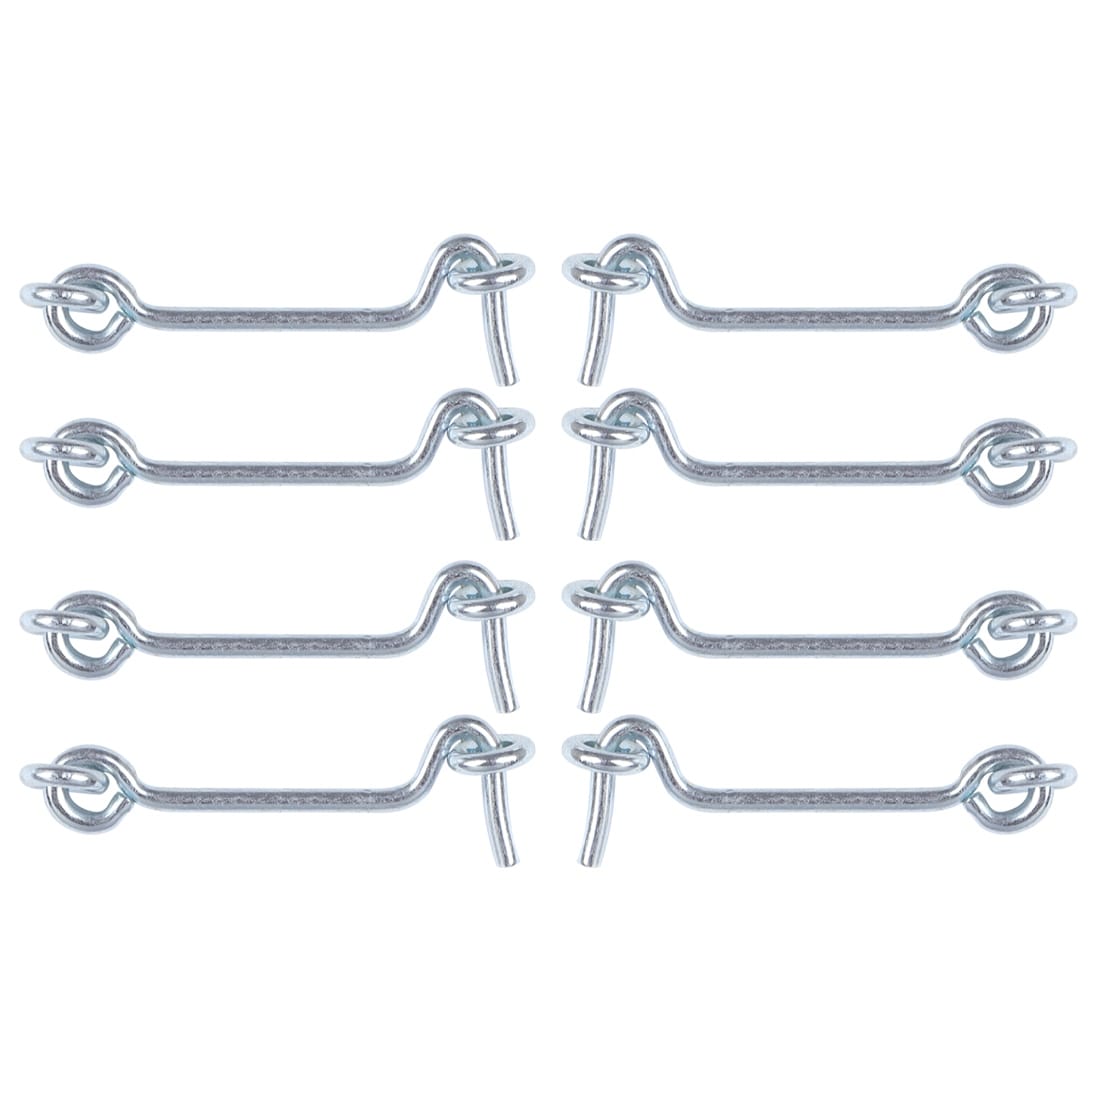 https://ak1.ostkcdn.com/images/products/is/images/direct/bc4783e241f045740c38c3fb4eef313ab91327ef/2.5%22Cabin-Hooks-Eye-Latch-Privacy-Hook-w-Screws-for-Window-Slide-Barn-Door-8pcs.jpg